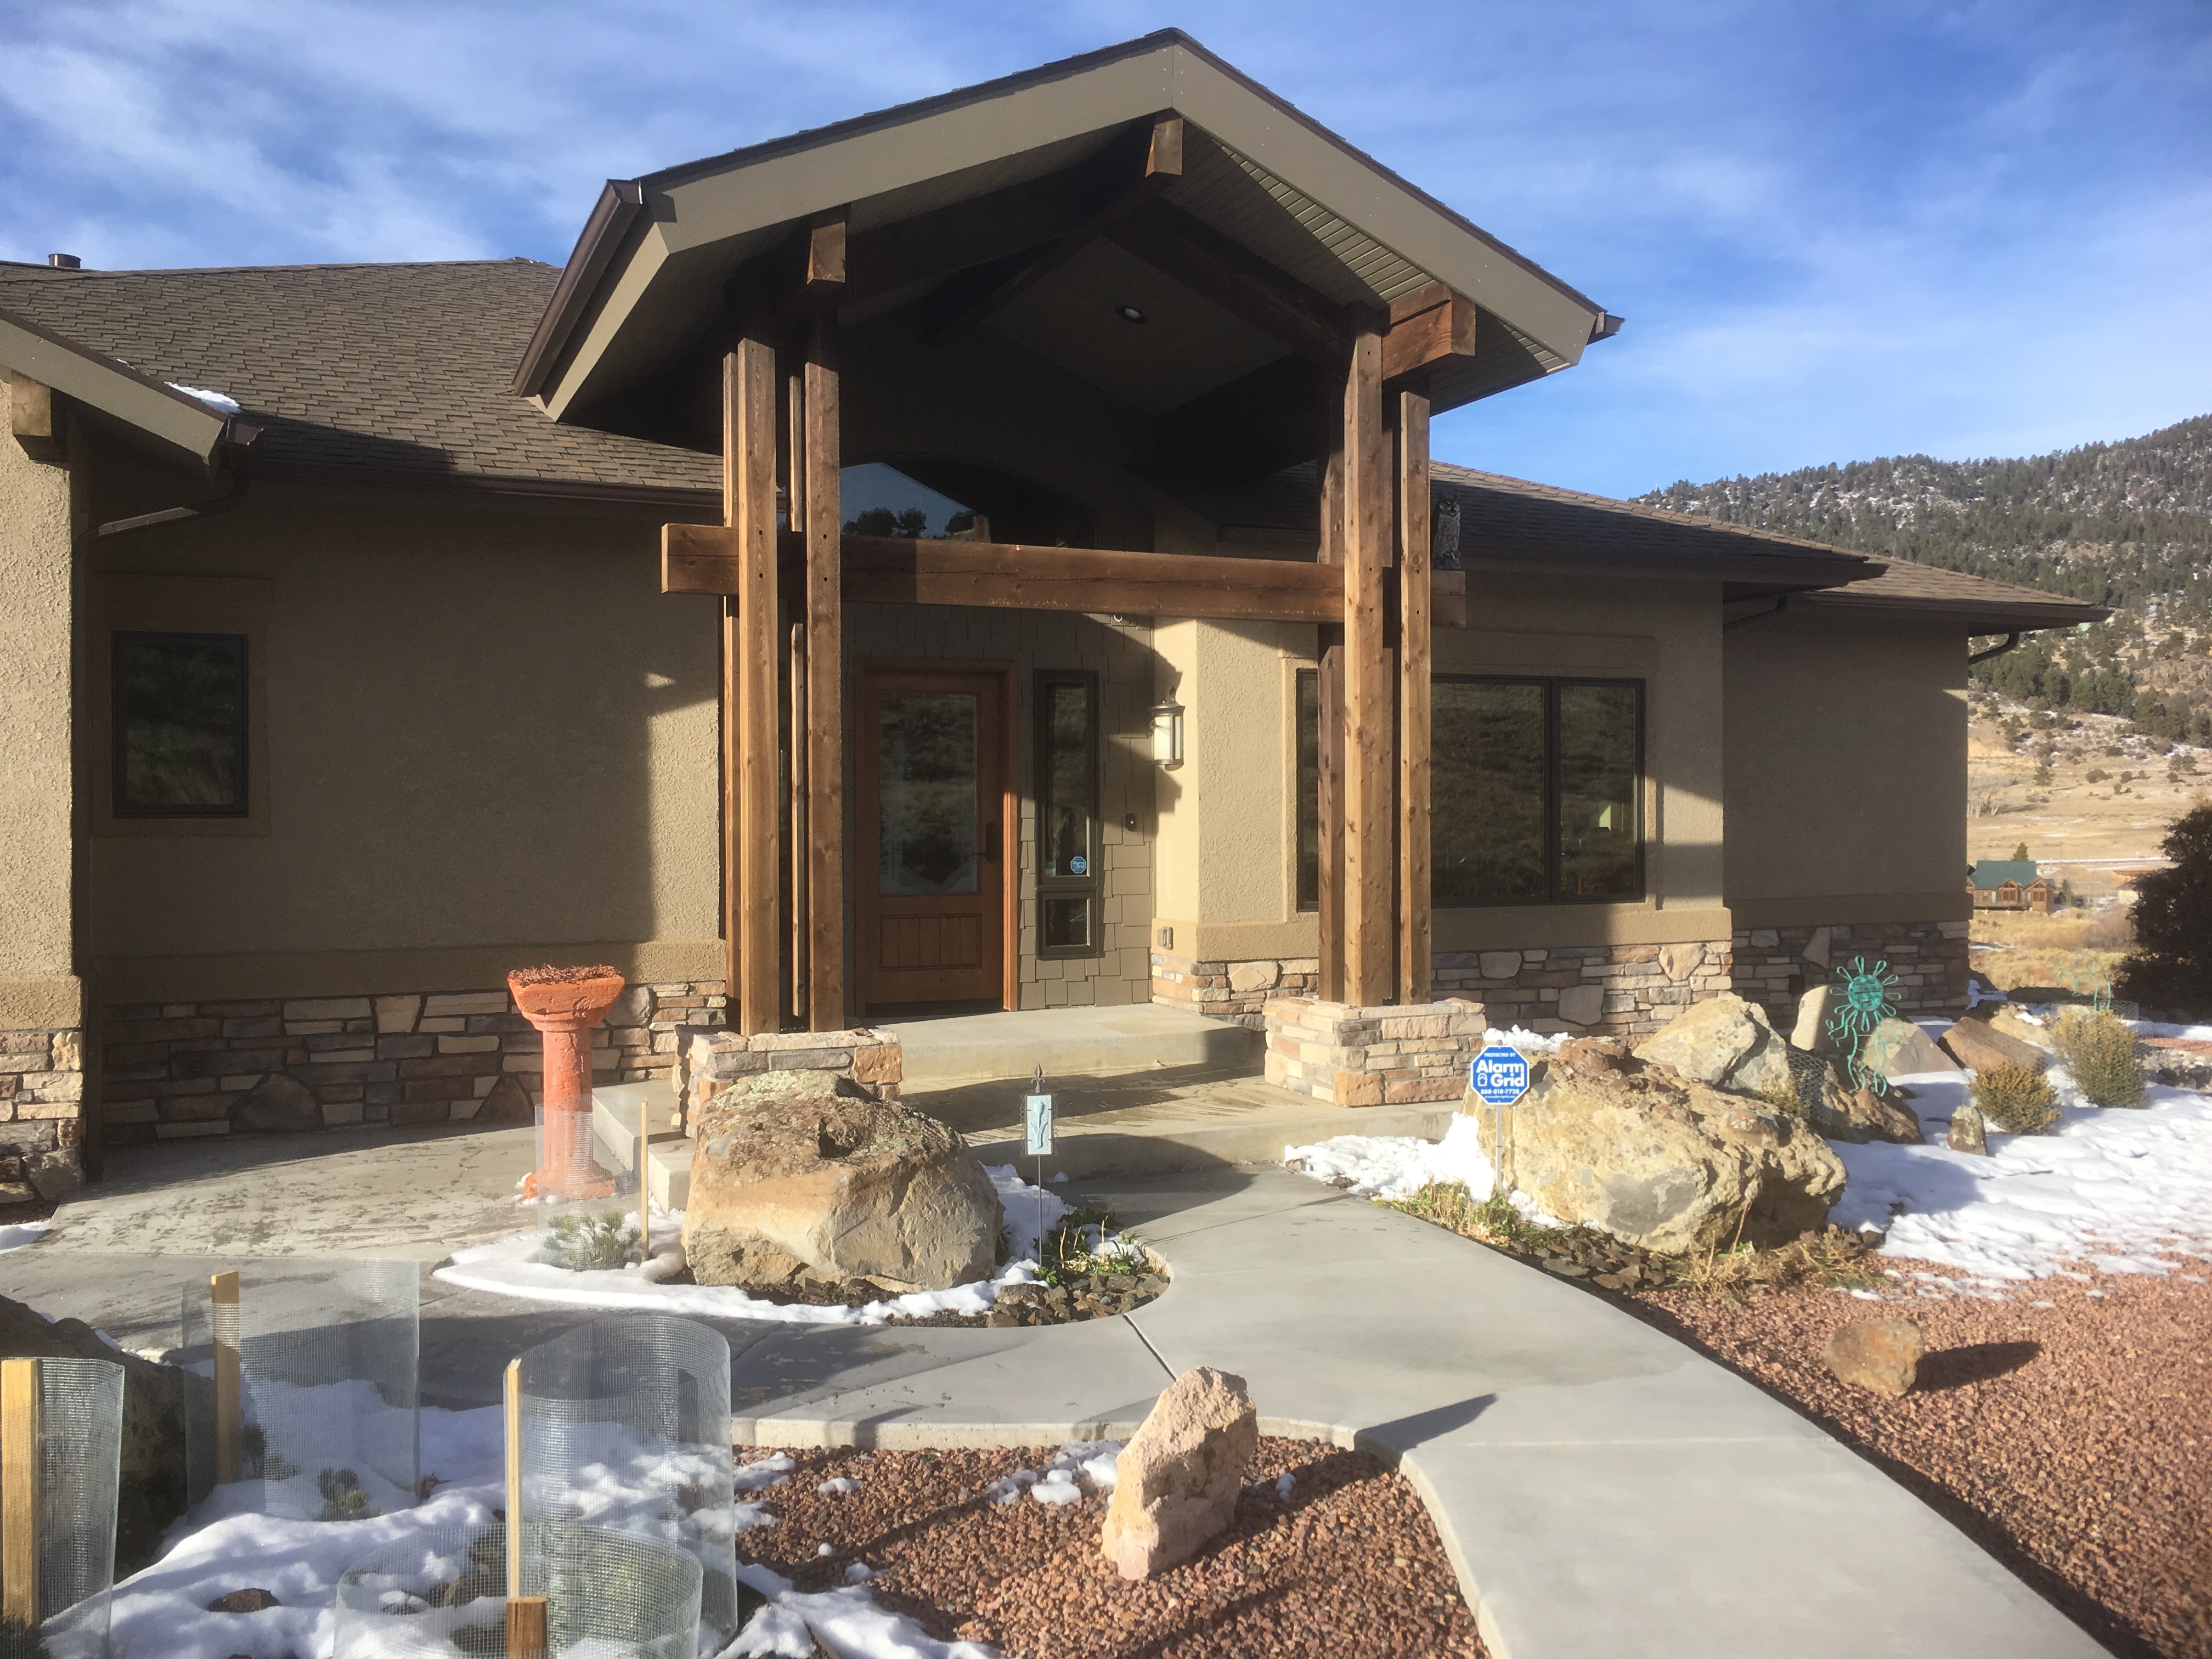 "The YouTube videos it made the installation job easy and gave me confidence that the system would be installed properly! I saved $900.00 on my Alarm Grid system!" -Jerry B. from North Fork, CO